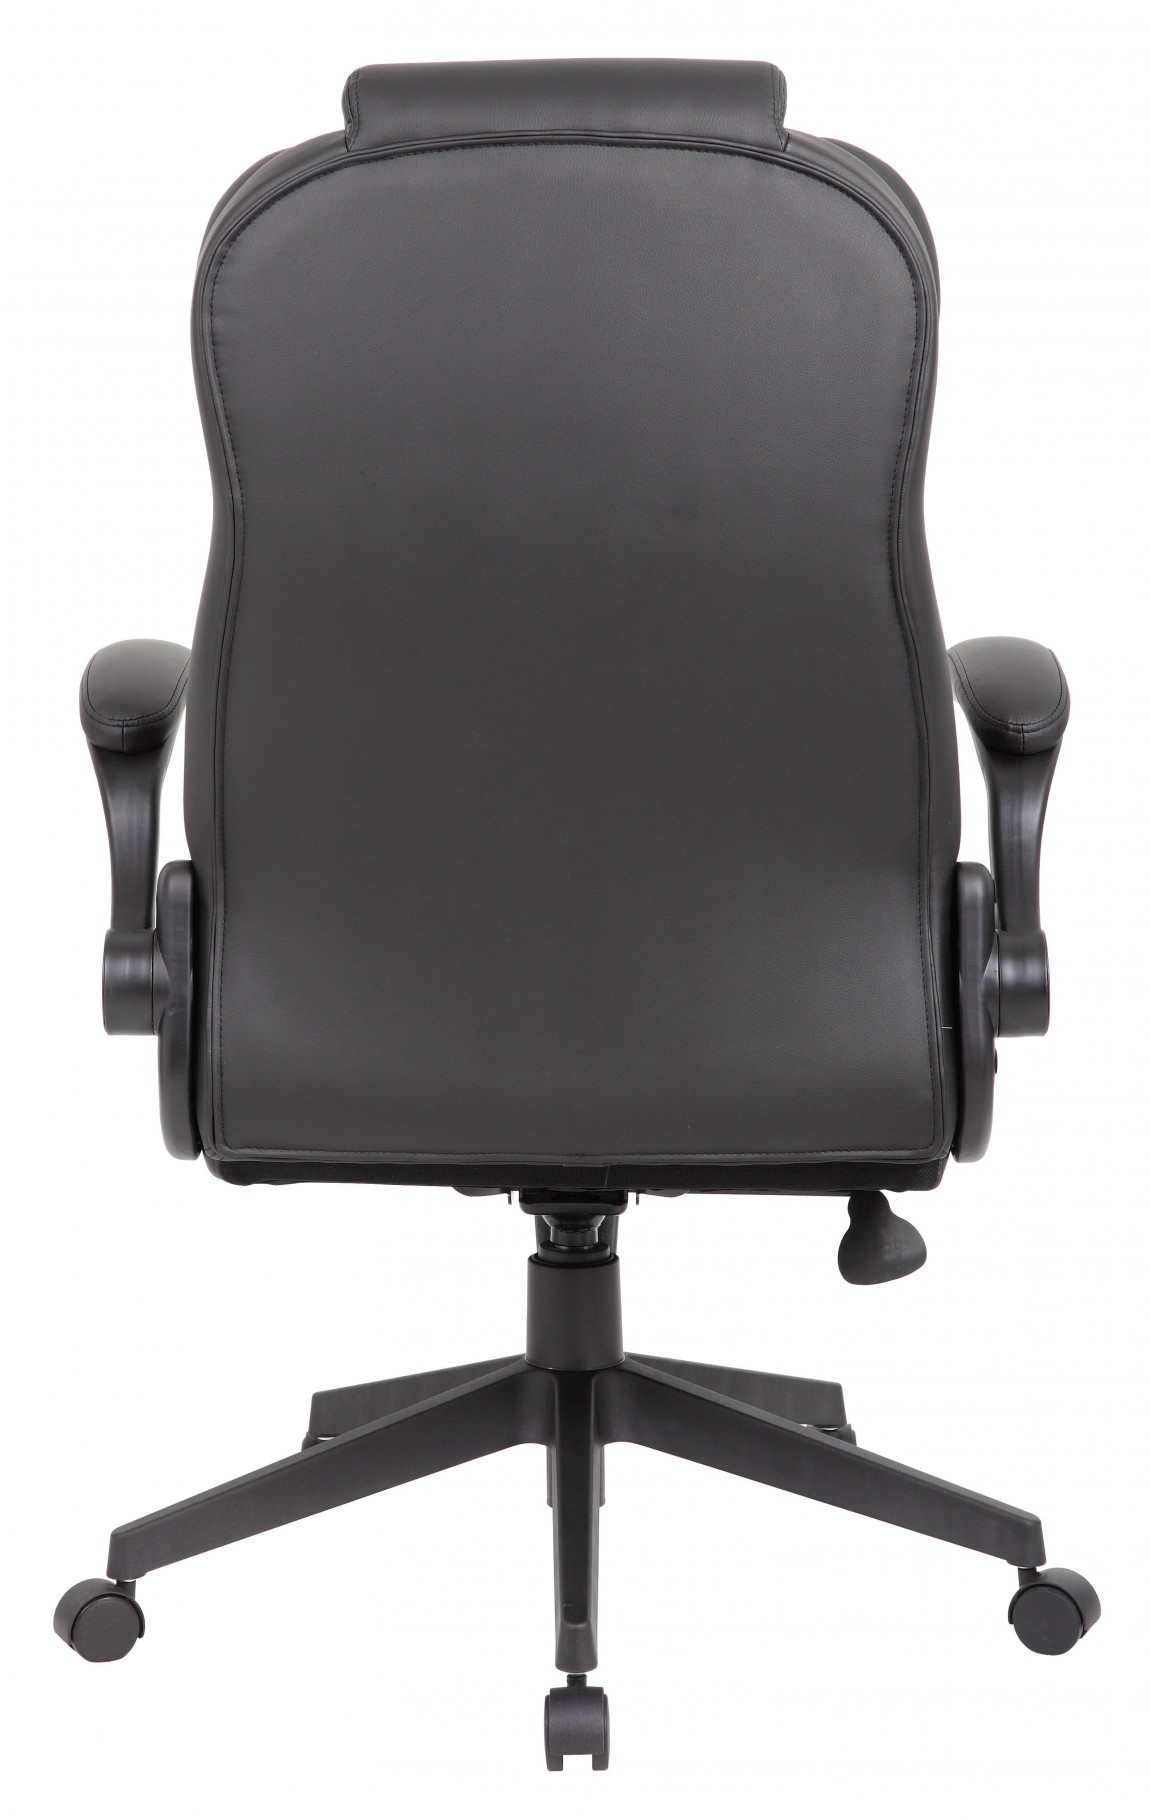 Black Executive High Back Office Chair | CaressoftPlus by Boss Office ...